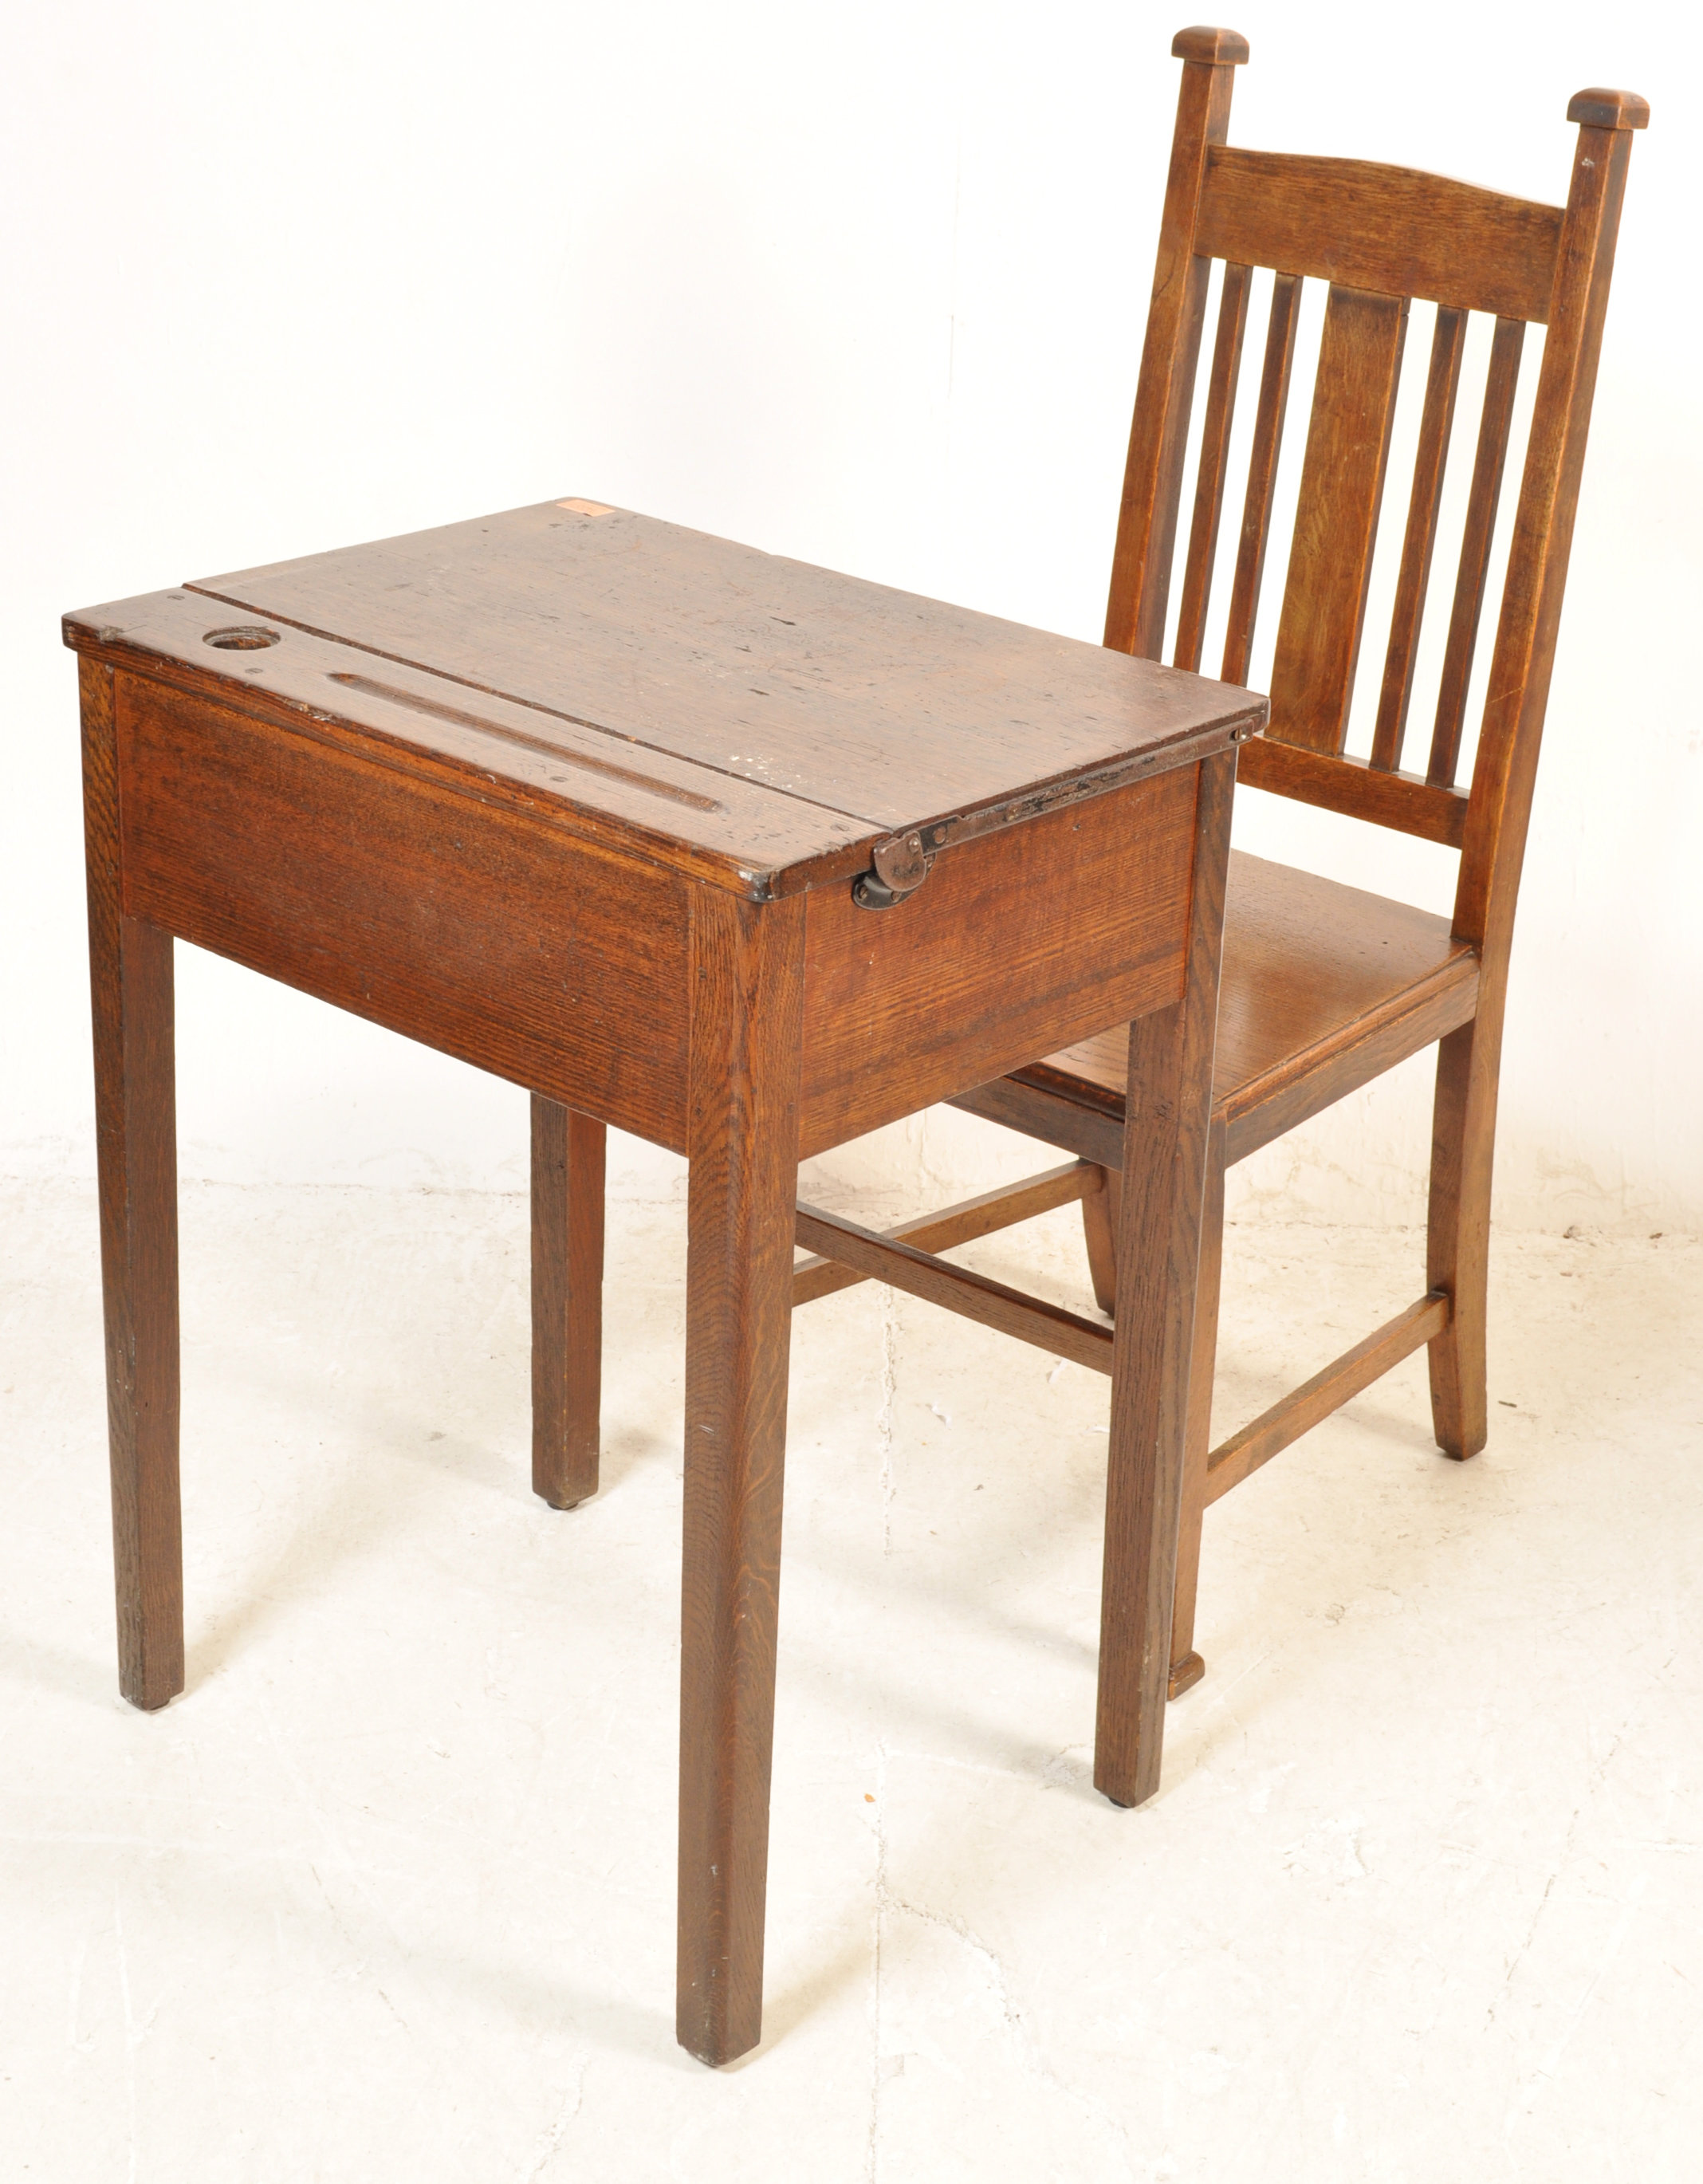 1930’S OAK SCHOOL DESK AND CHAIR - Image 2 of 6